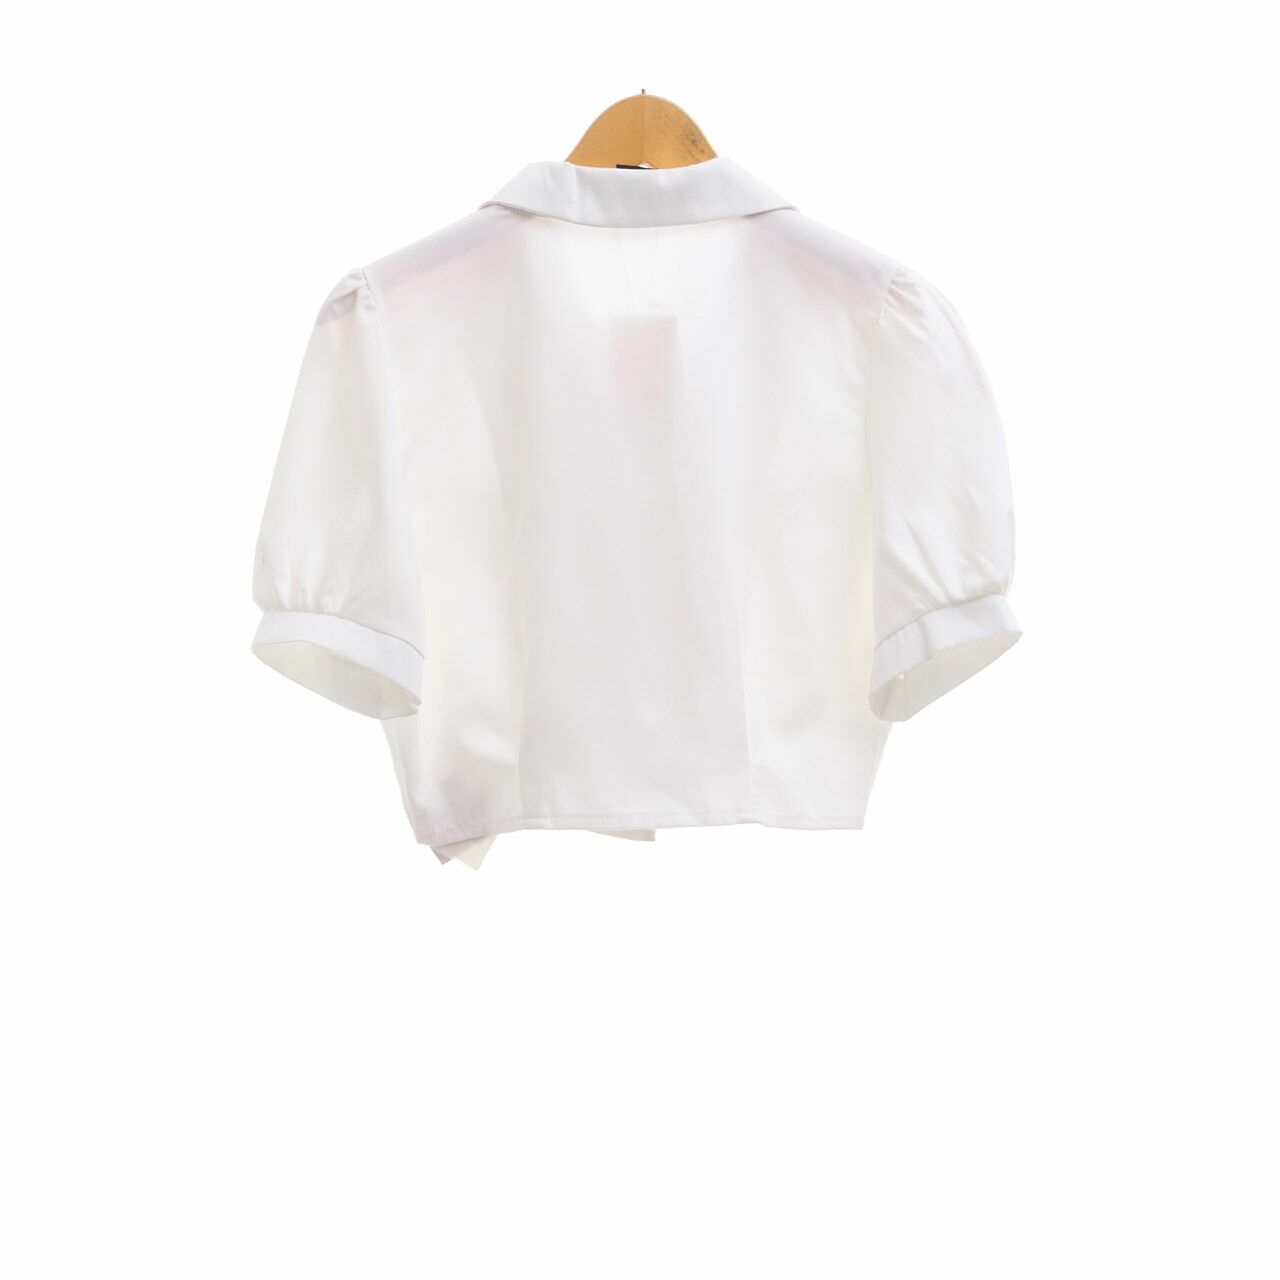 Day by Love And flair White Shirt